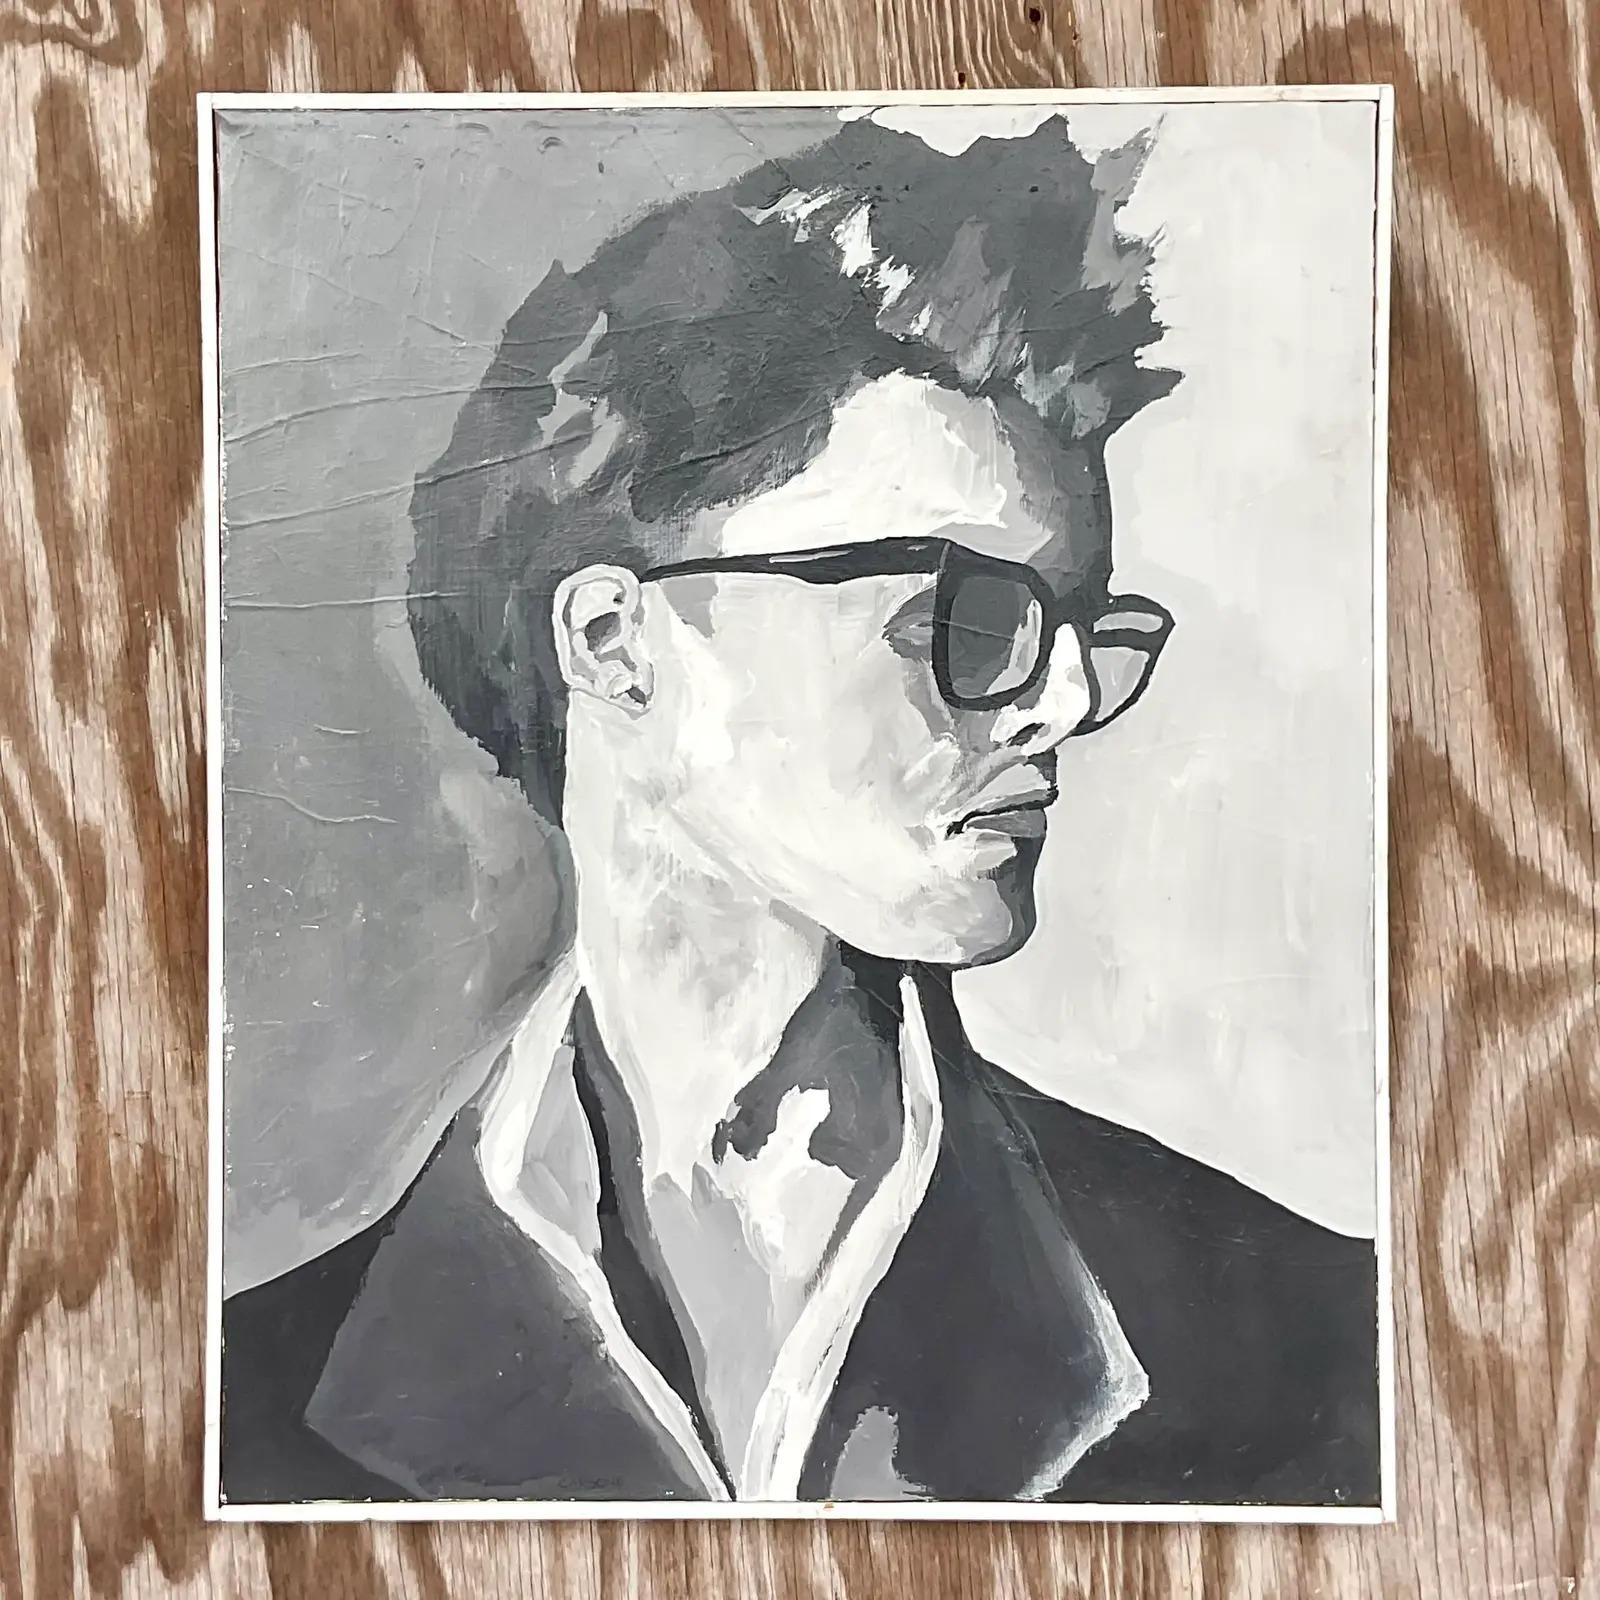 Fantastic vintage Boho original oil painting. A graphic gray scale composition of a stylish young man. Signed by the artist Carbone. Acquired from a Palm Beach estate.